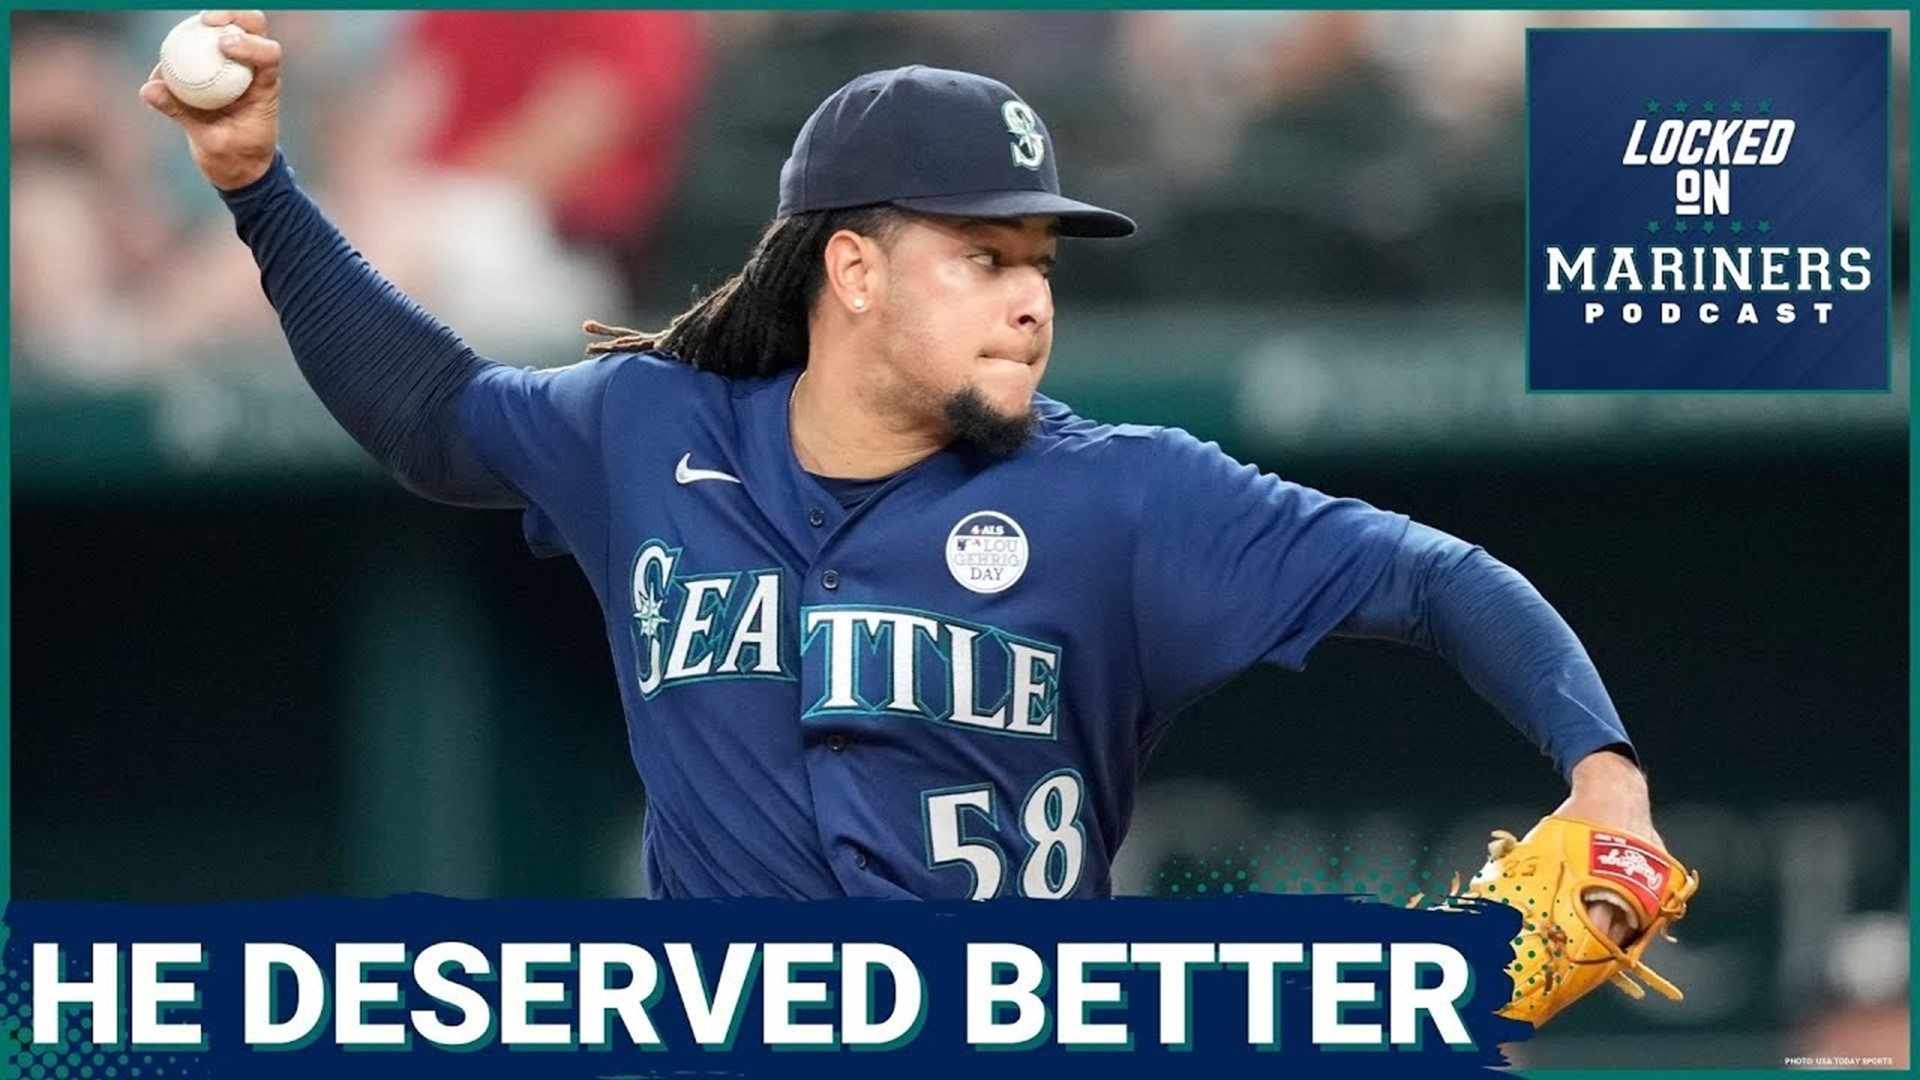 Well, that was ugly. The Mariners' offense continued their 3-game skid, this time getting shutout by Jon Gray and running their total to 1 run.